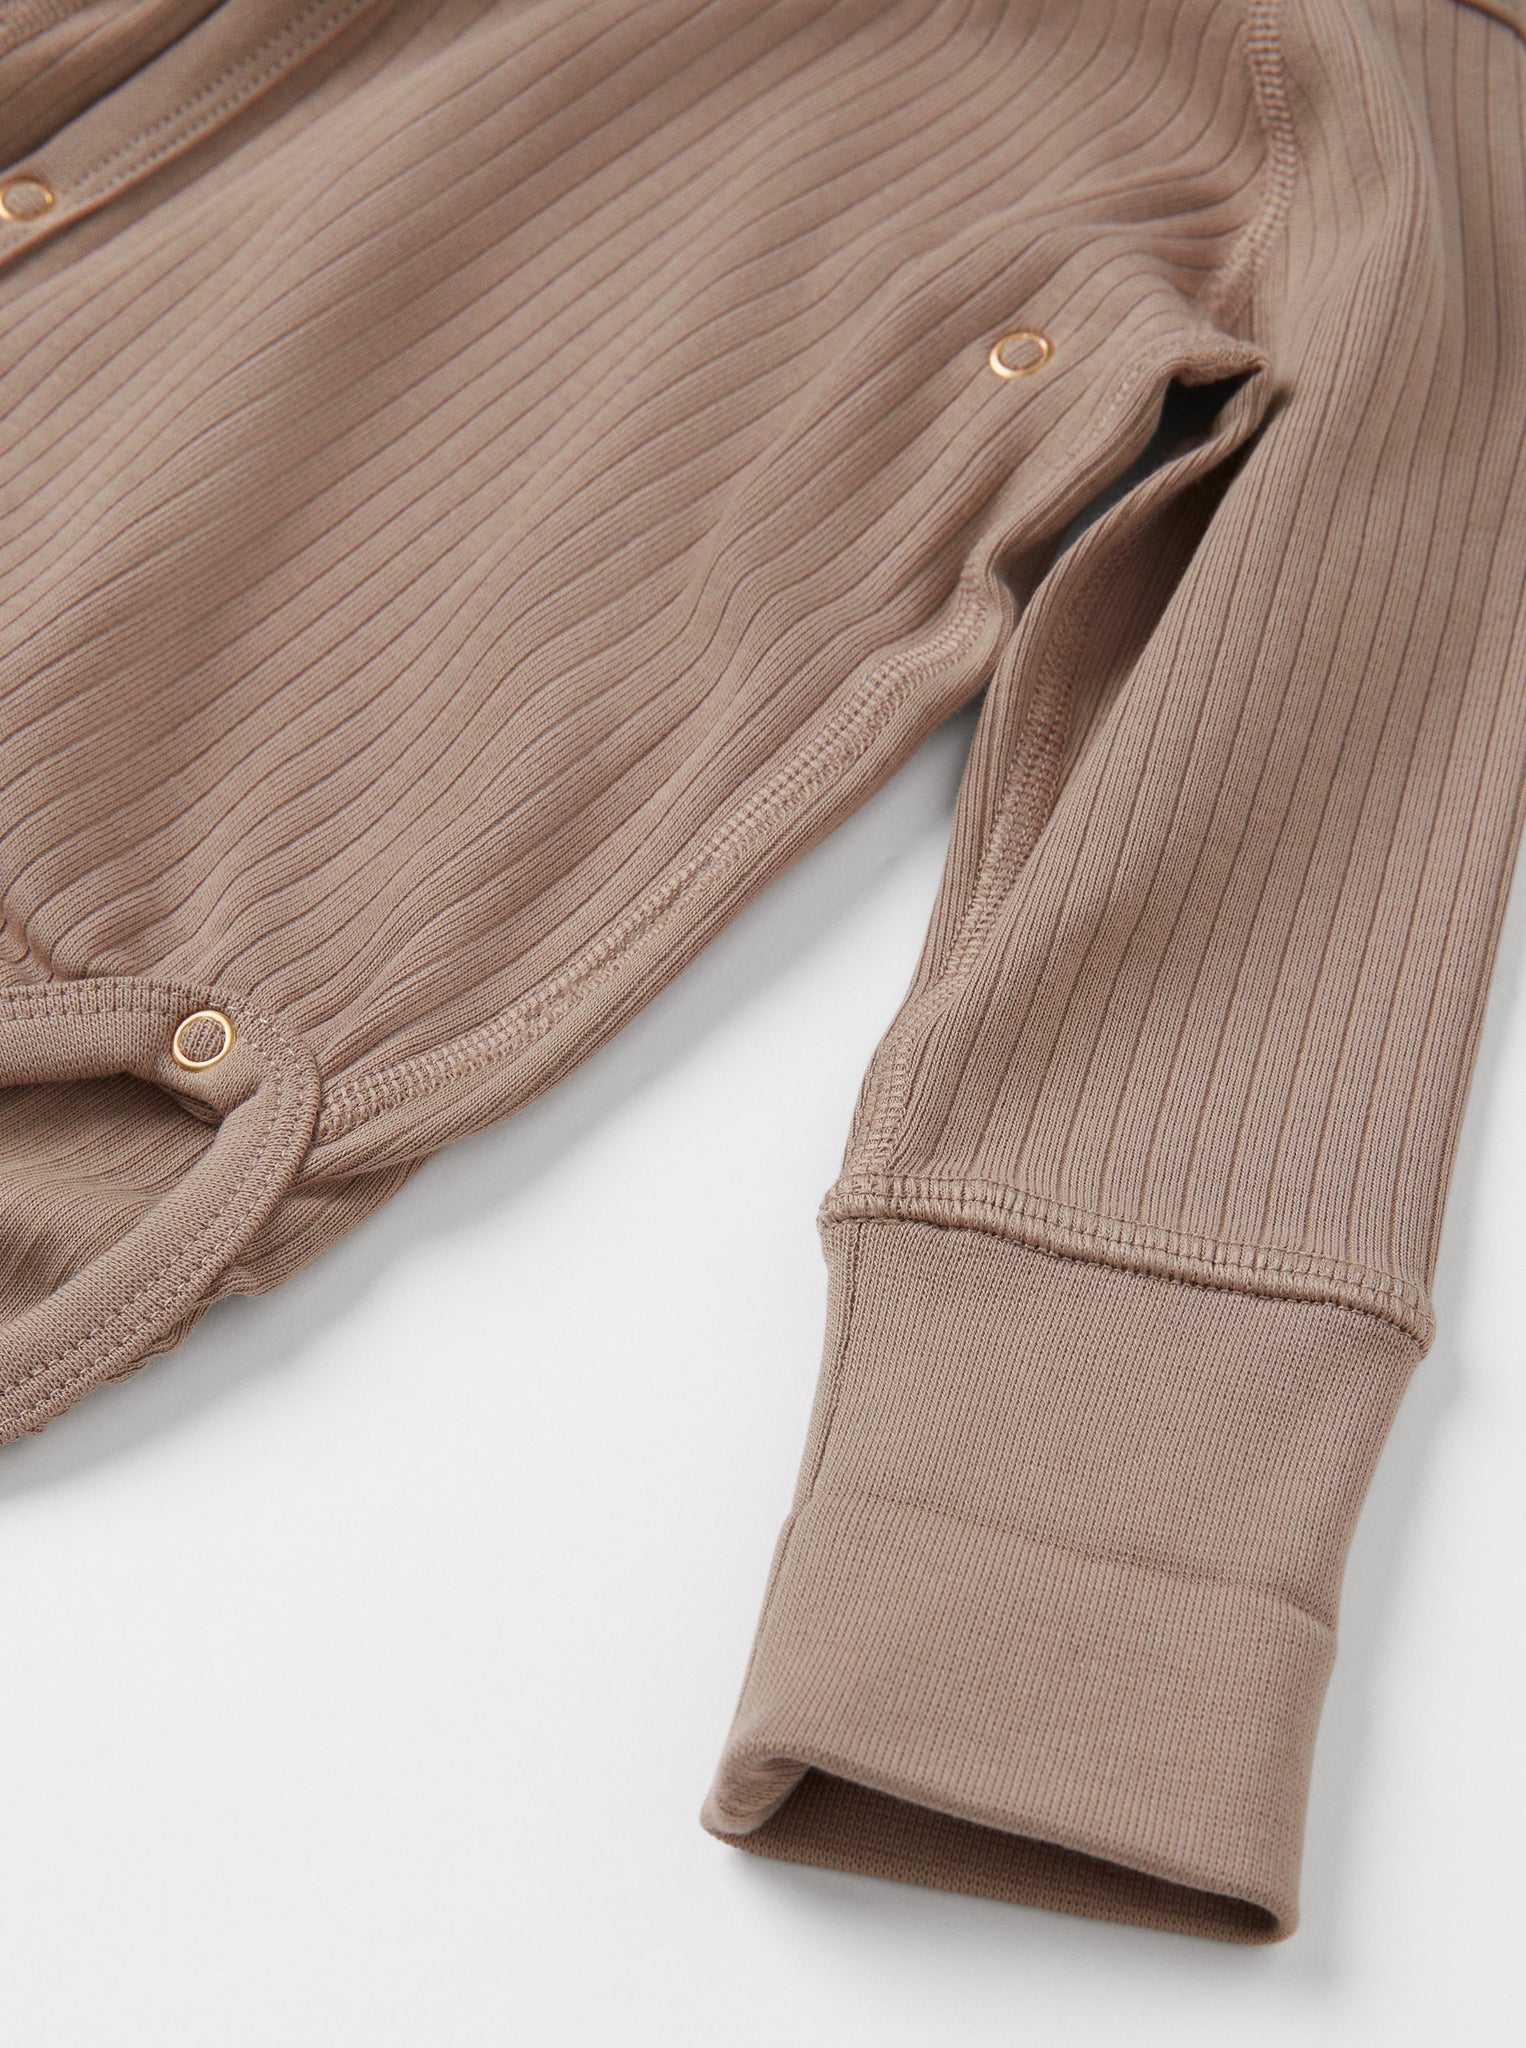 Ribbed Brown Wraparound Babygrow from the Polarn O. Pyret babywear collection. Ethically produced baby clothing.